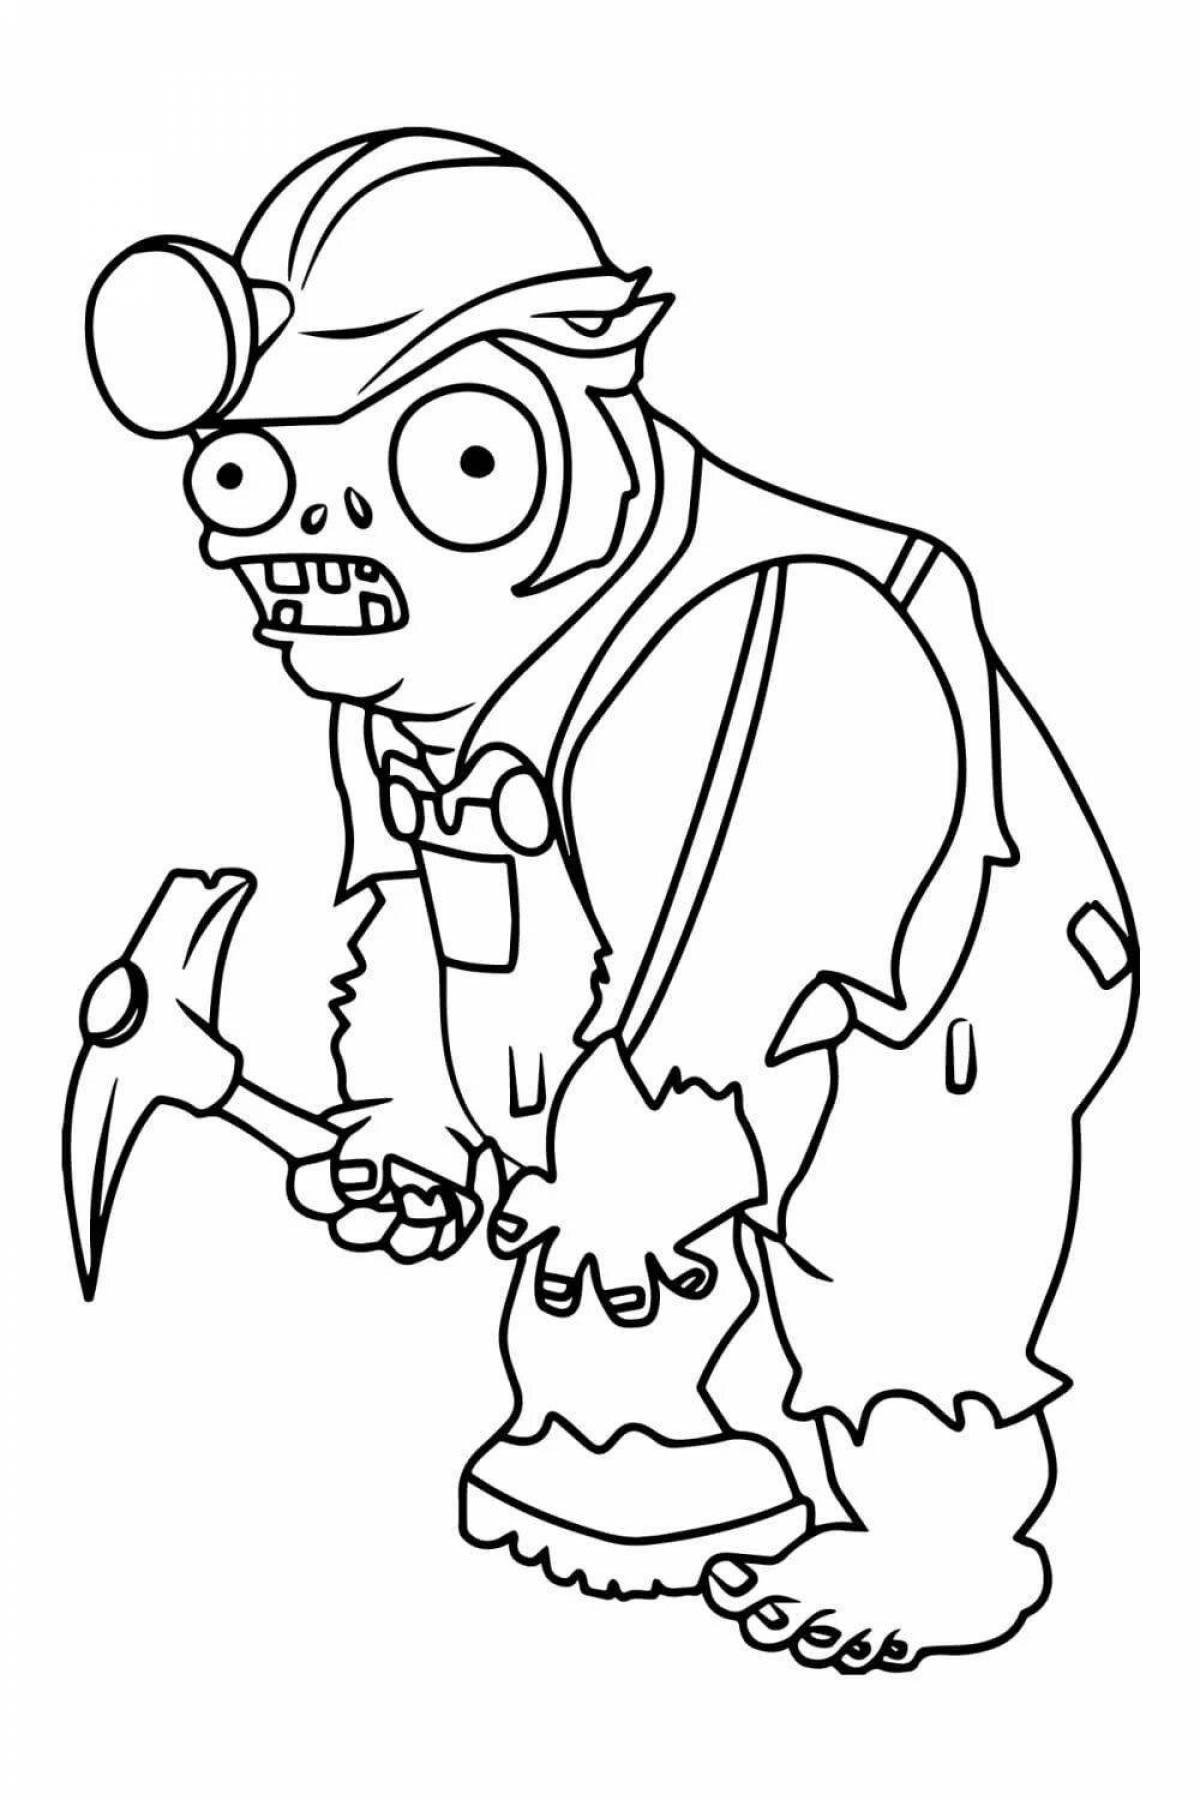 Chilling Zombie Coloring Page